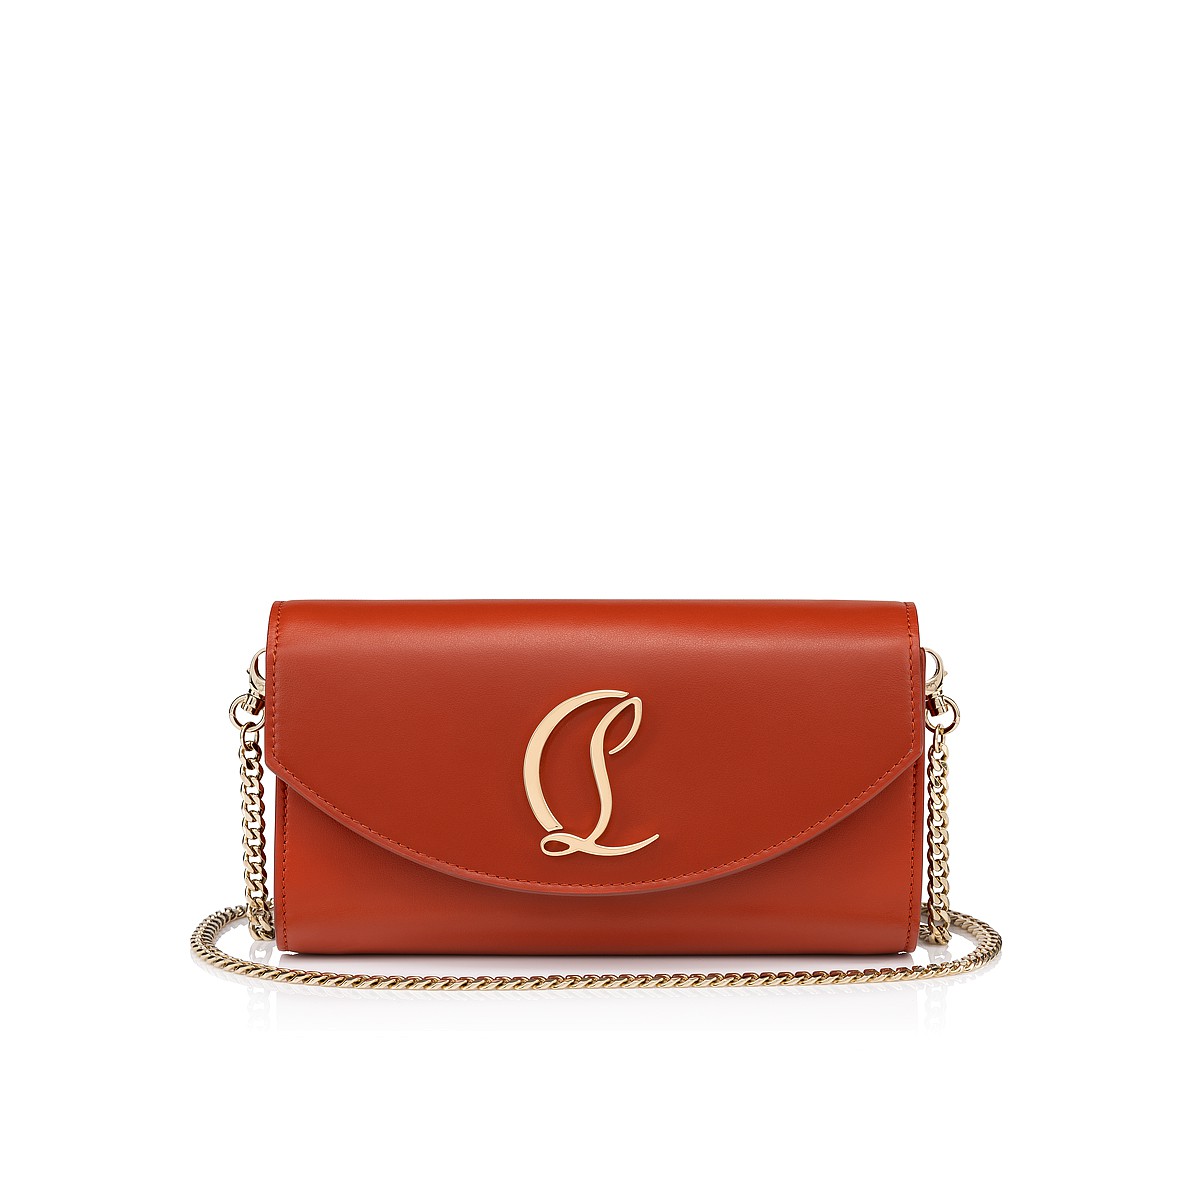 Small Leather Goods - Loubi54 Wallet On Chain - Christian Louboutin